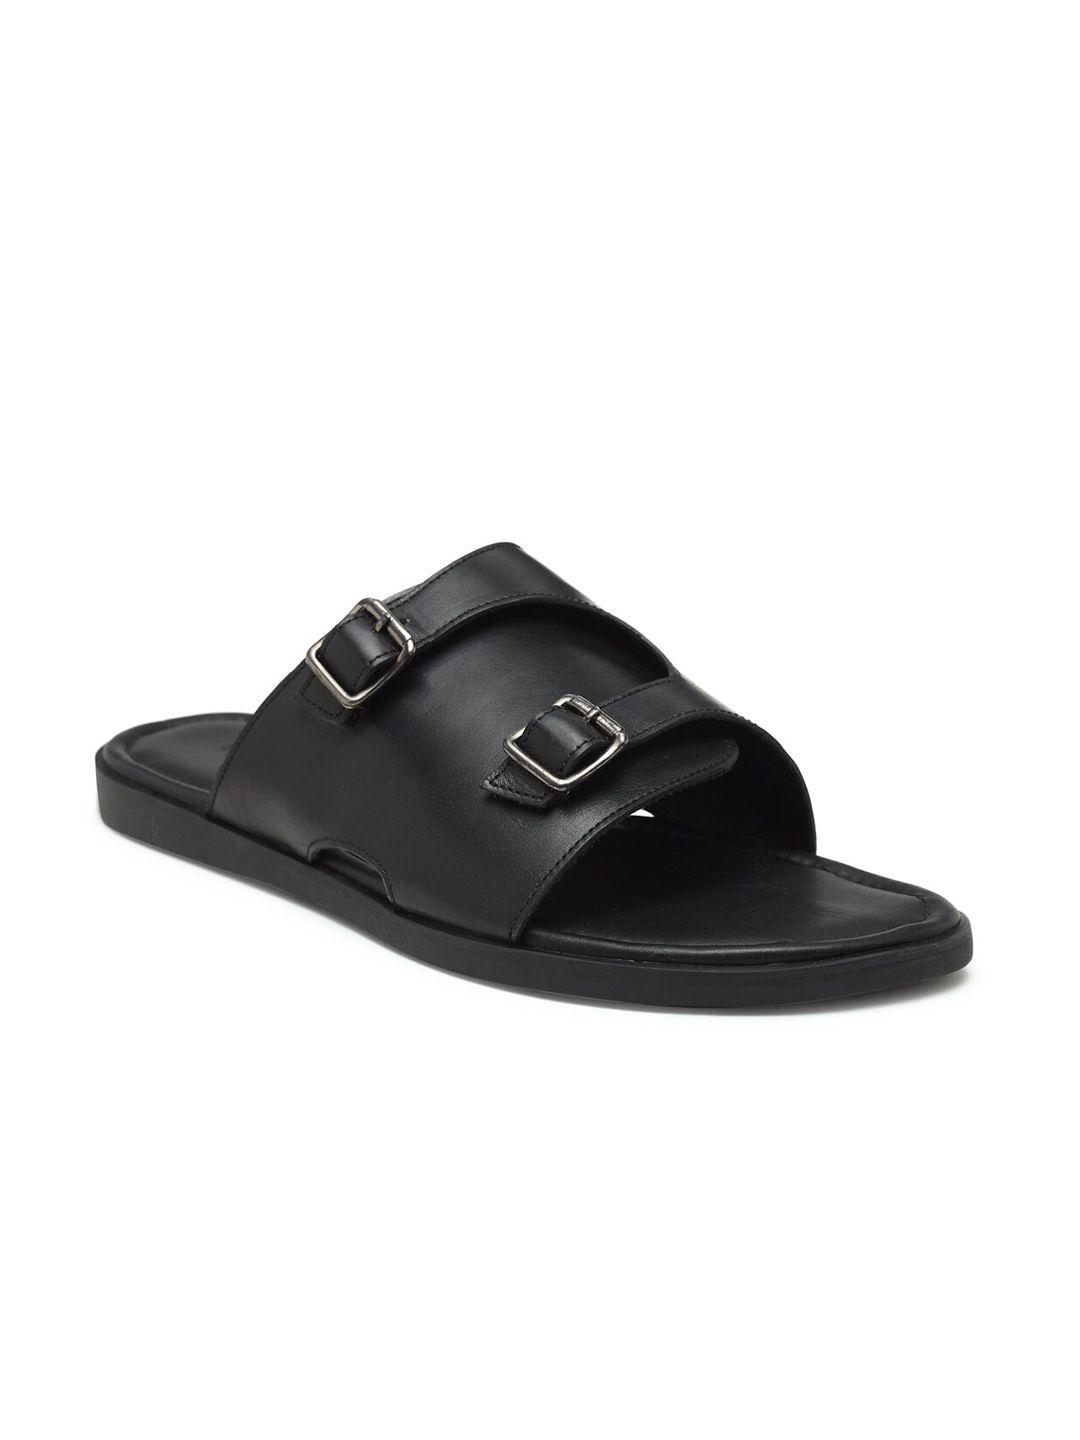 beaver men open toe leather comfort sandals with buckle detail